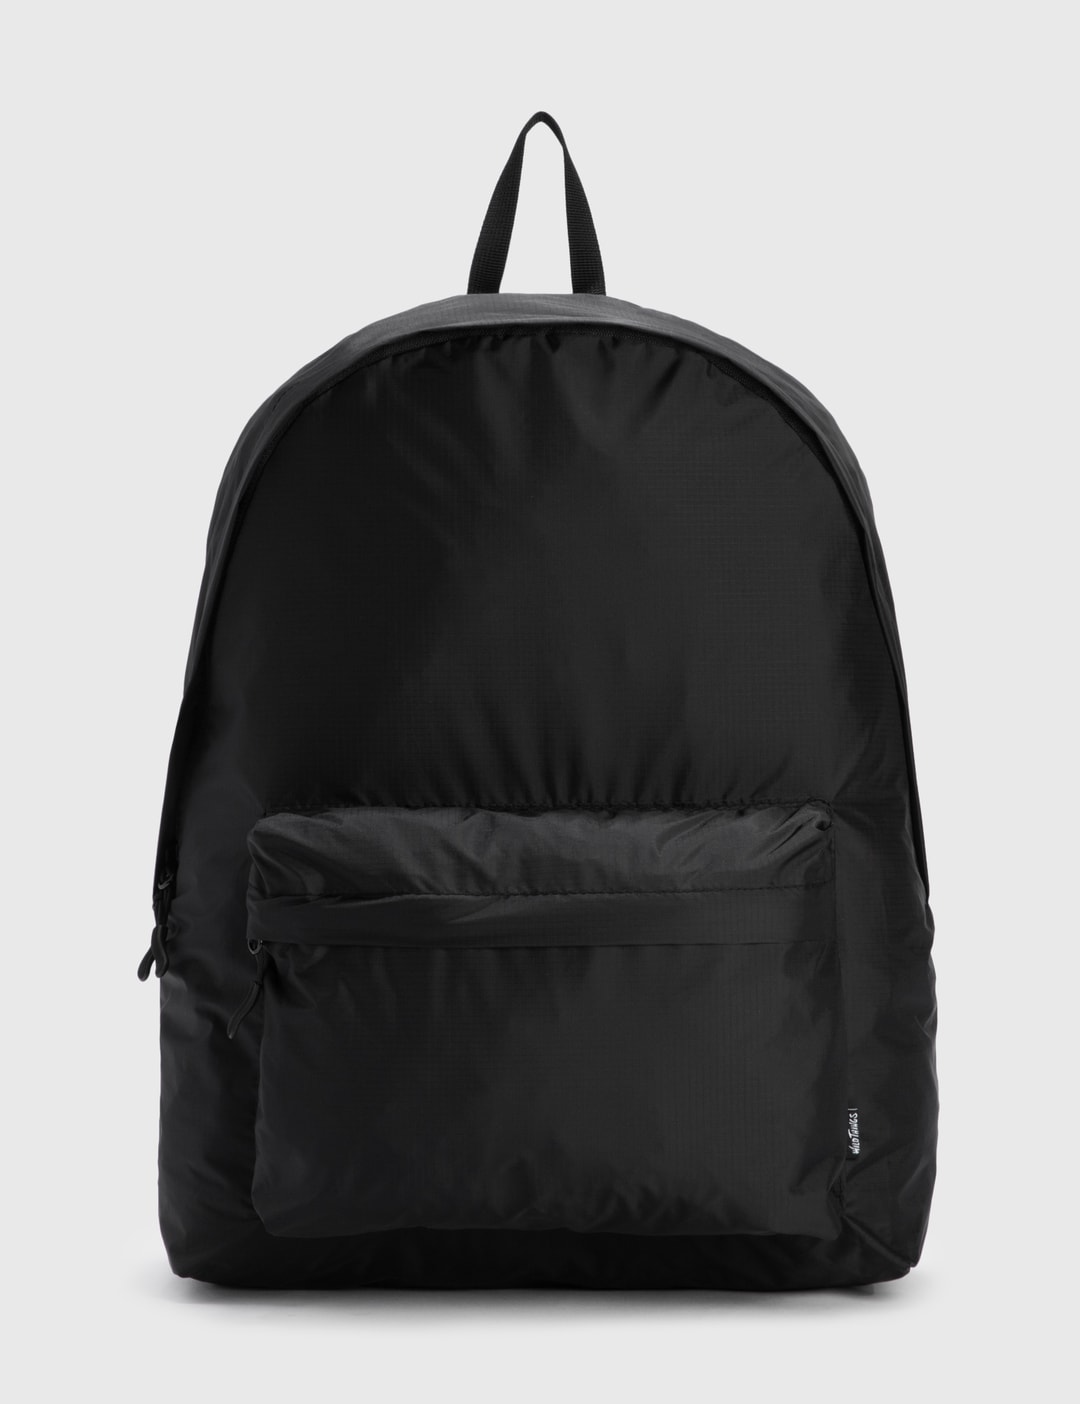 WILD THINGS - Packable Daypack | HBX - Globally Curated Fashion and ...